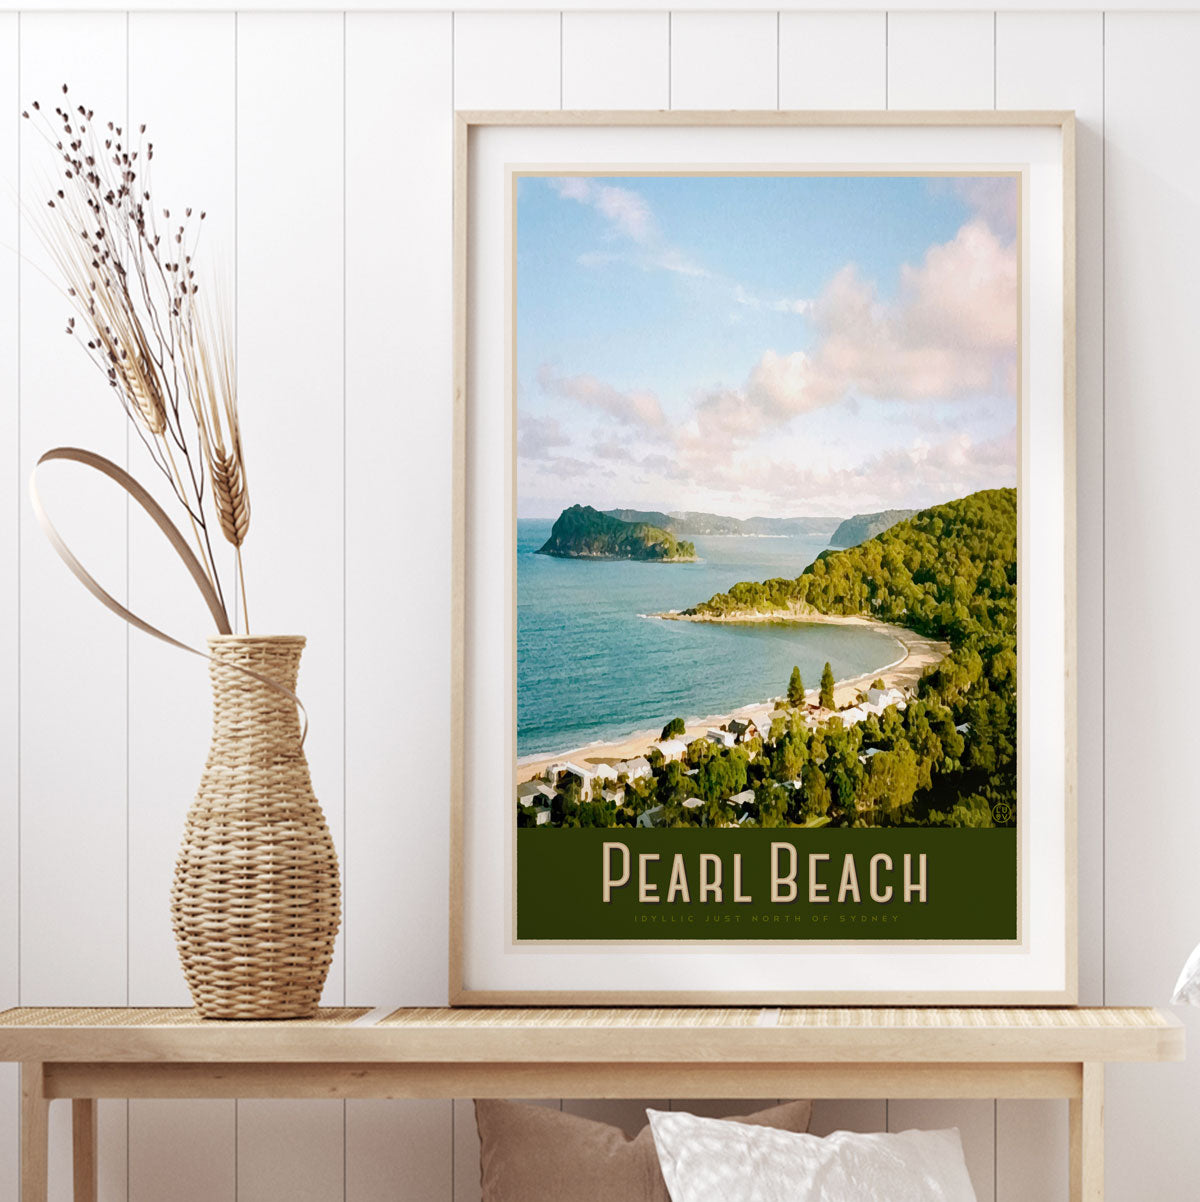 Pearl beach vintage travel poster print central coast by places we luv